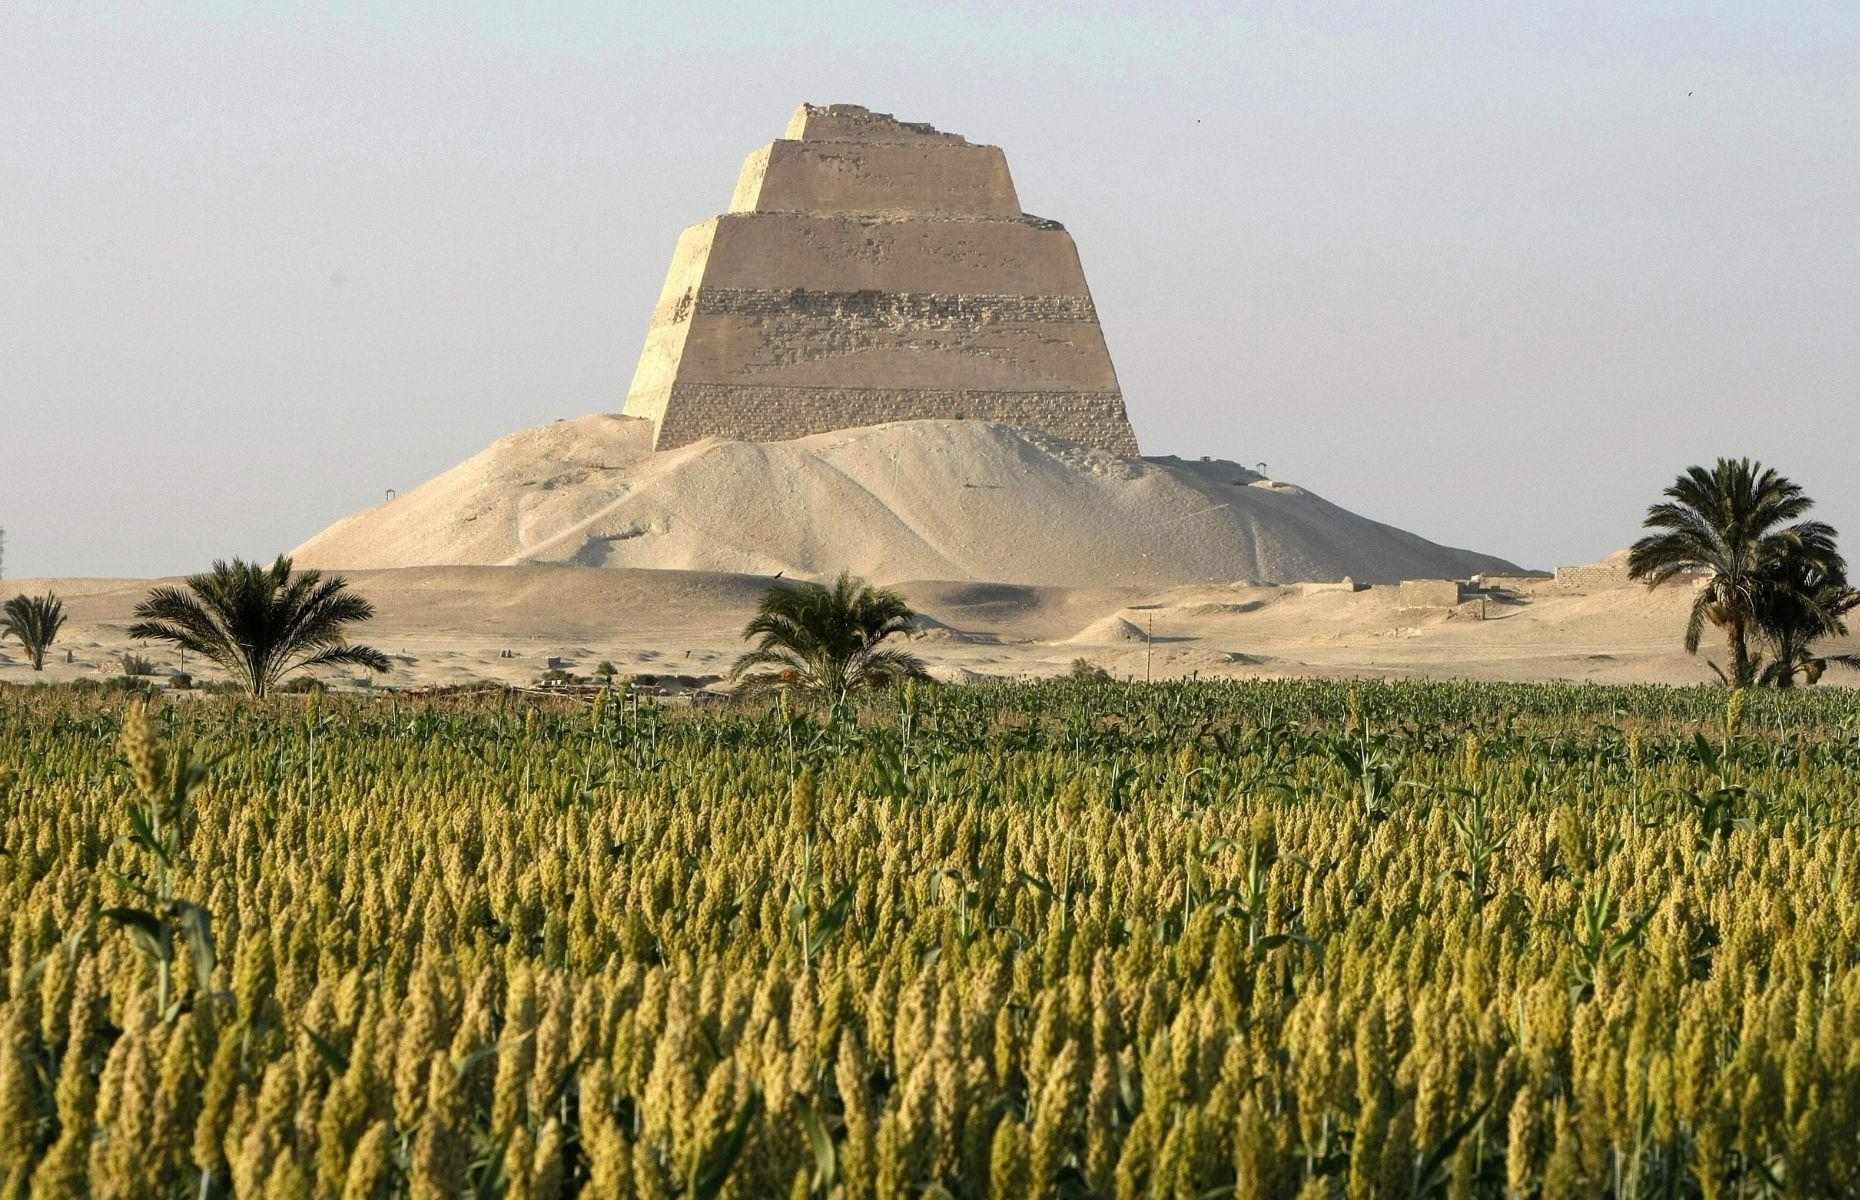 <p>Located roughly 62 miles (99km) from Cairo, Meidum Pyramid was built during the reign of King Sneferu, the first pharaoh of the Fourth Dynasty (2613 to 2589 BC). Meidum Pyramid was Egypt’s first straight-sided pyramid – affectionately said by some to resemble a sandcastle – and it's often described as a ‘false pyramid’. Numerous construction issues meant it was never completed, so its appearance is noticeably different to other Egyptian pyramids. </p>  <p><a href="https://www.loveexploring.com/gallerylist/90108/the-bent-pyramid-and-other-ancient-egyptian-mysteries"><strong>Learn more about the Bent Pyramid and other Ancient Egyptian mysteries</strong></a></p>